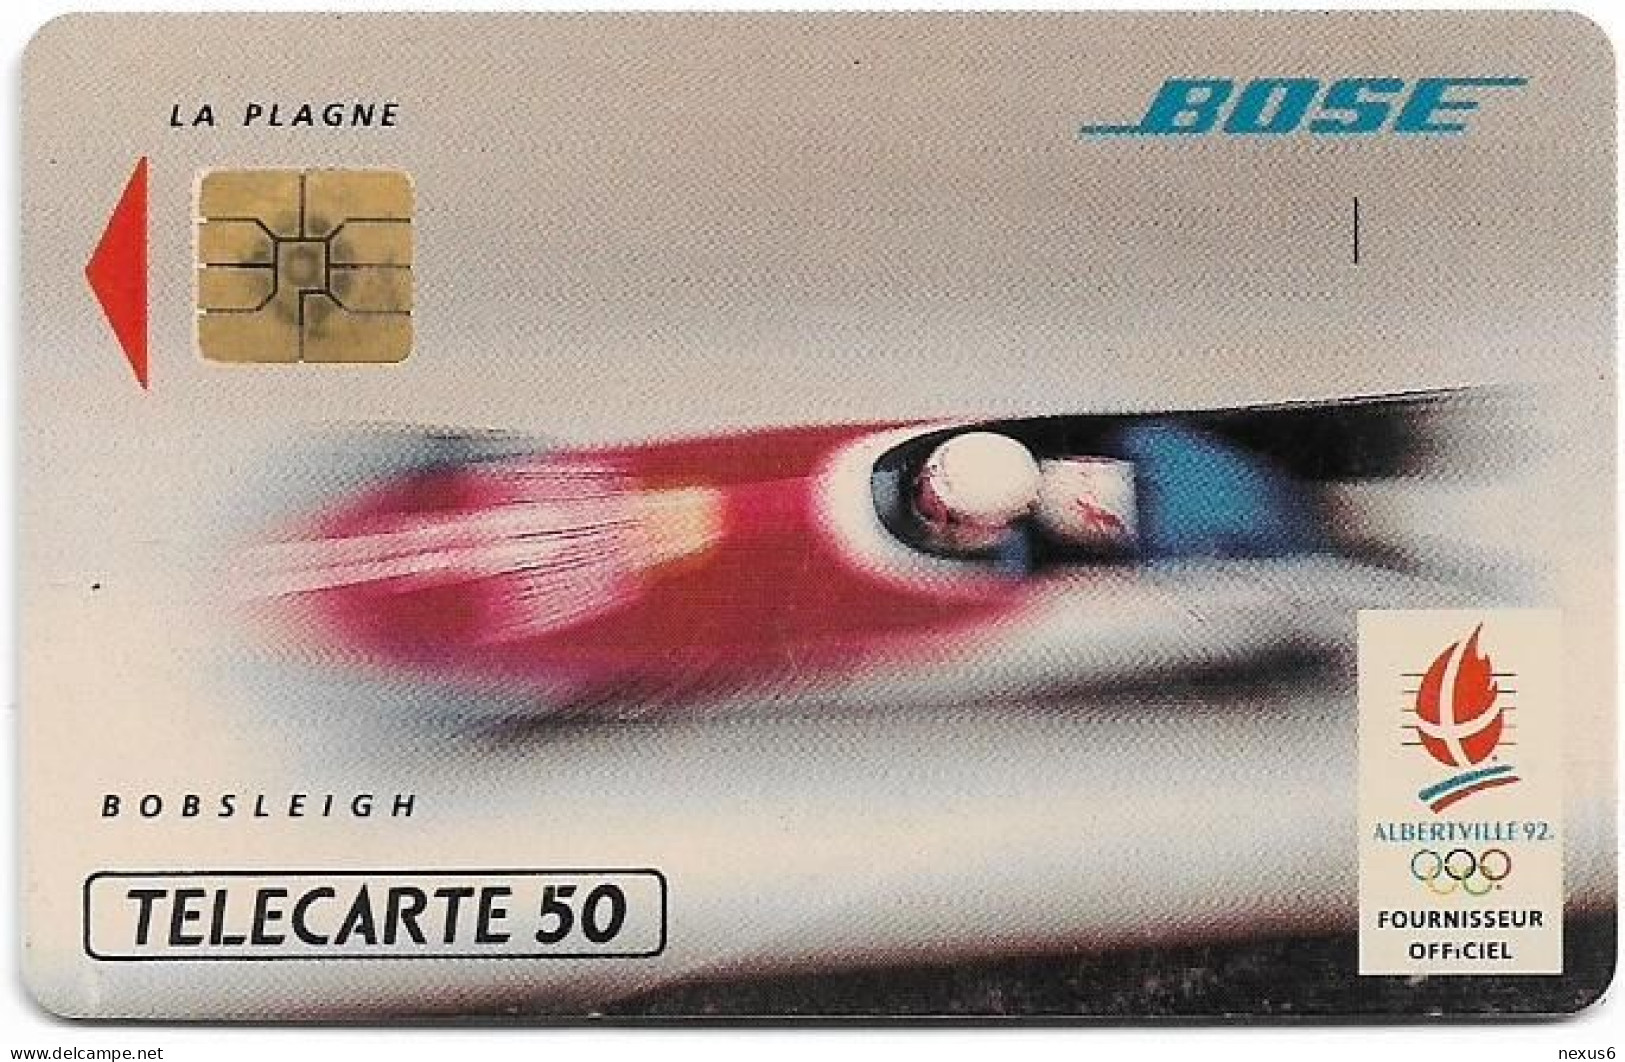 France - 0218 - Bose - Bobsleigh, Solaic, 12.1991, 50Units, 111.000ex, Used - 1991